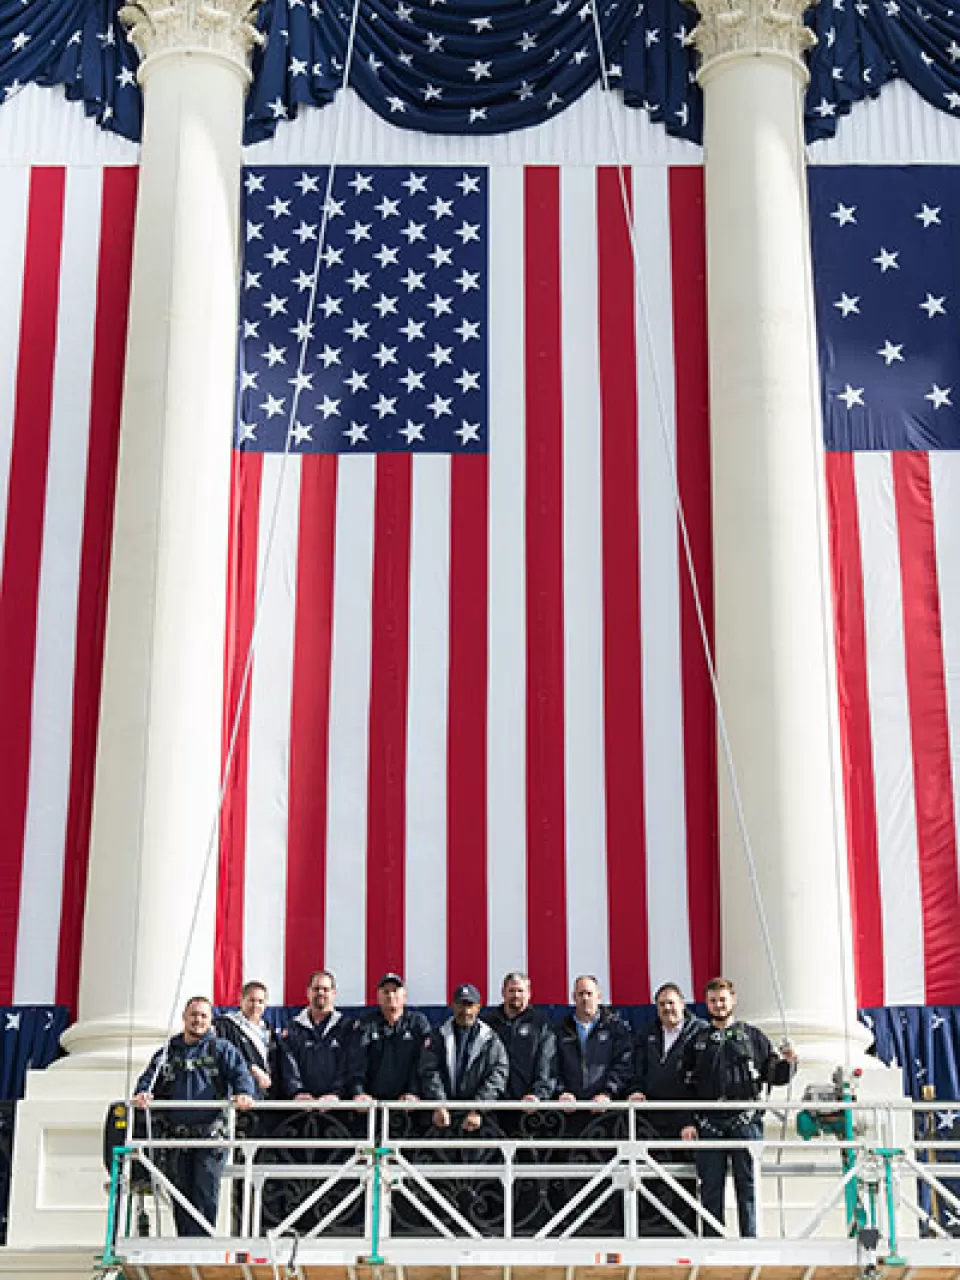 Employees of the Architect of the Capitol pause to stand in front of a flag during inauguration set up.